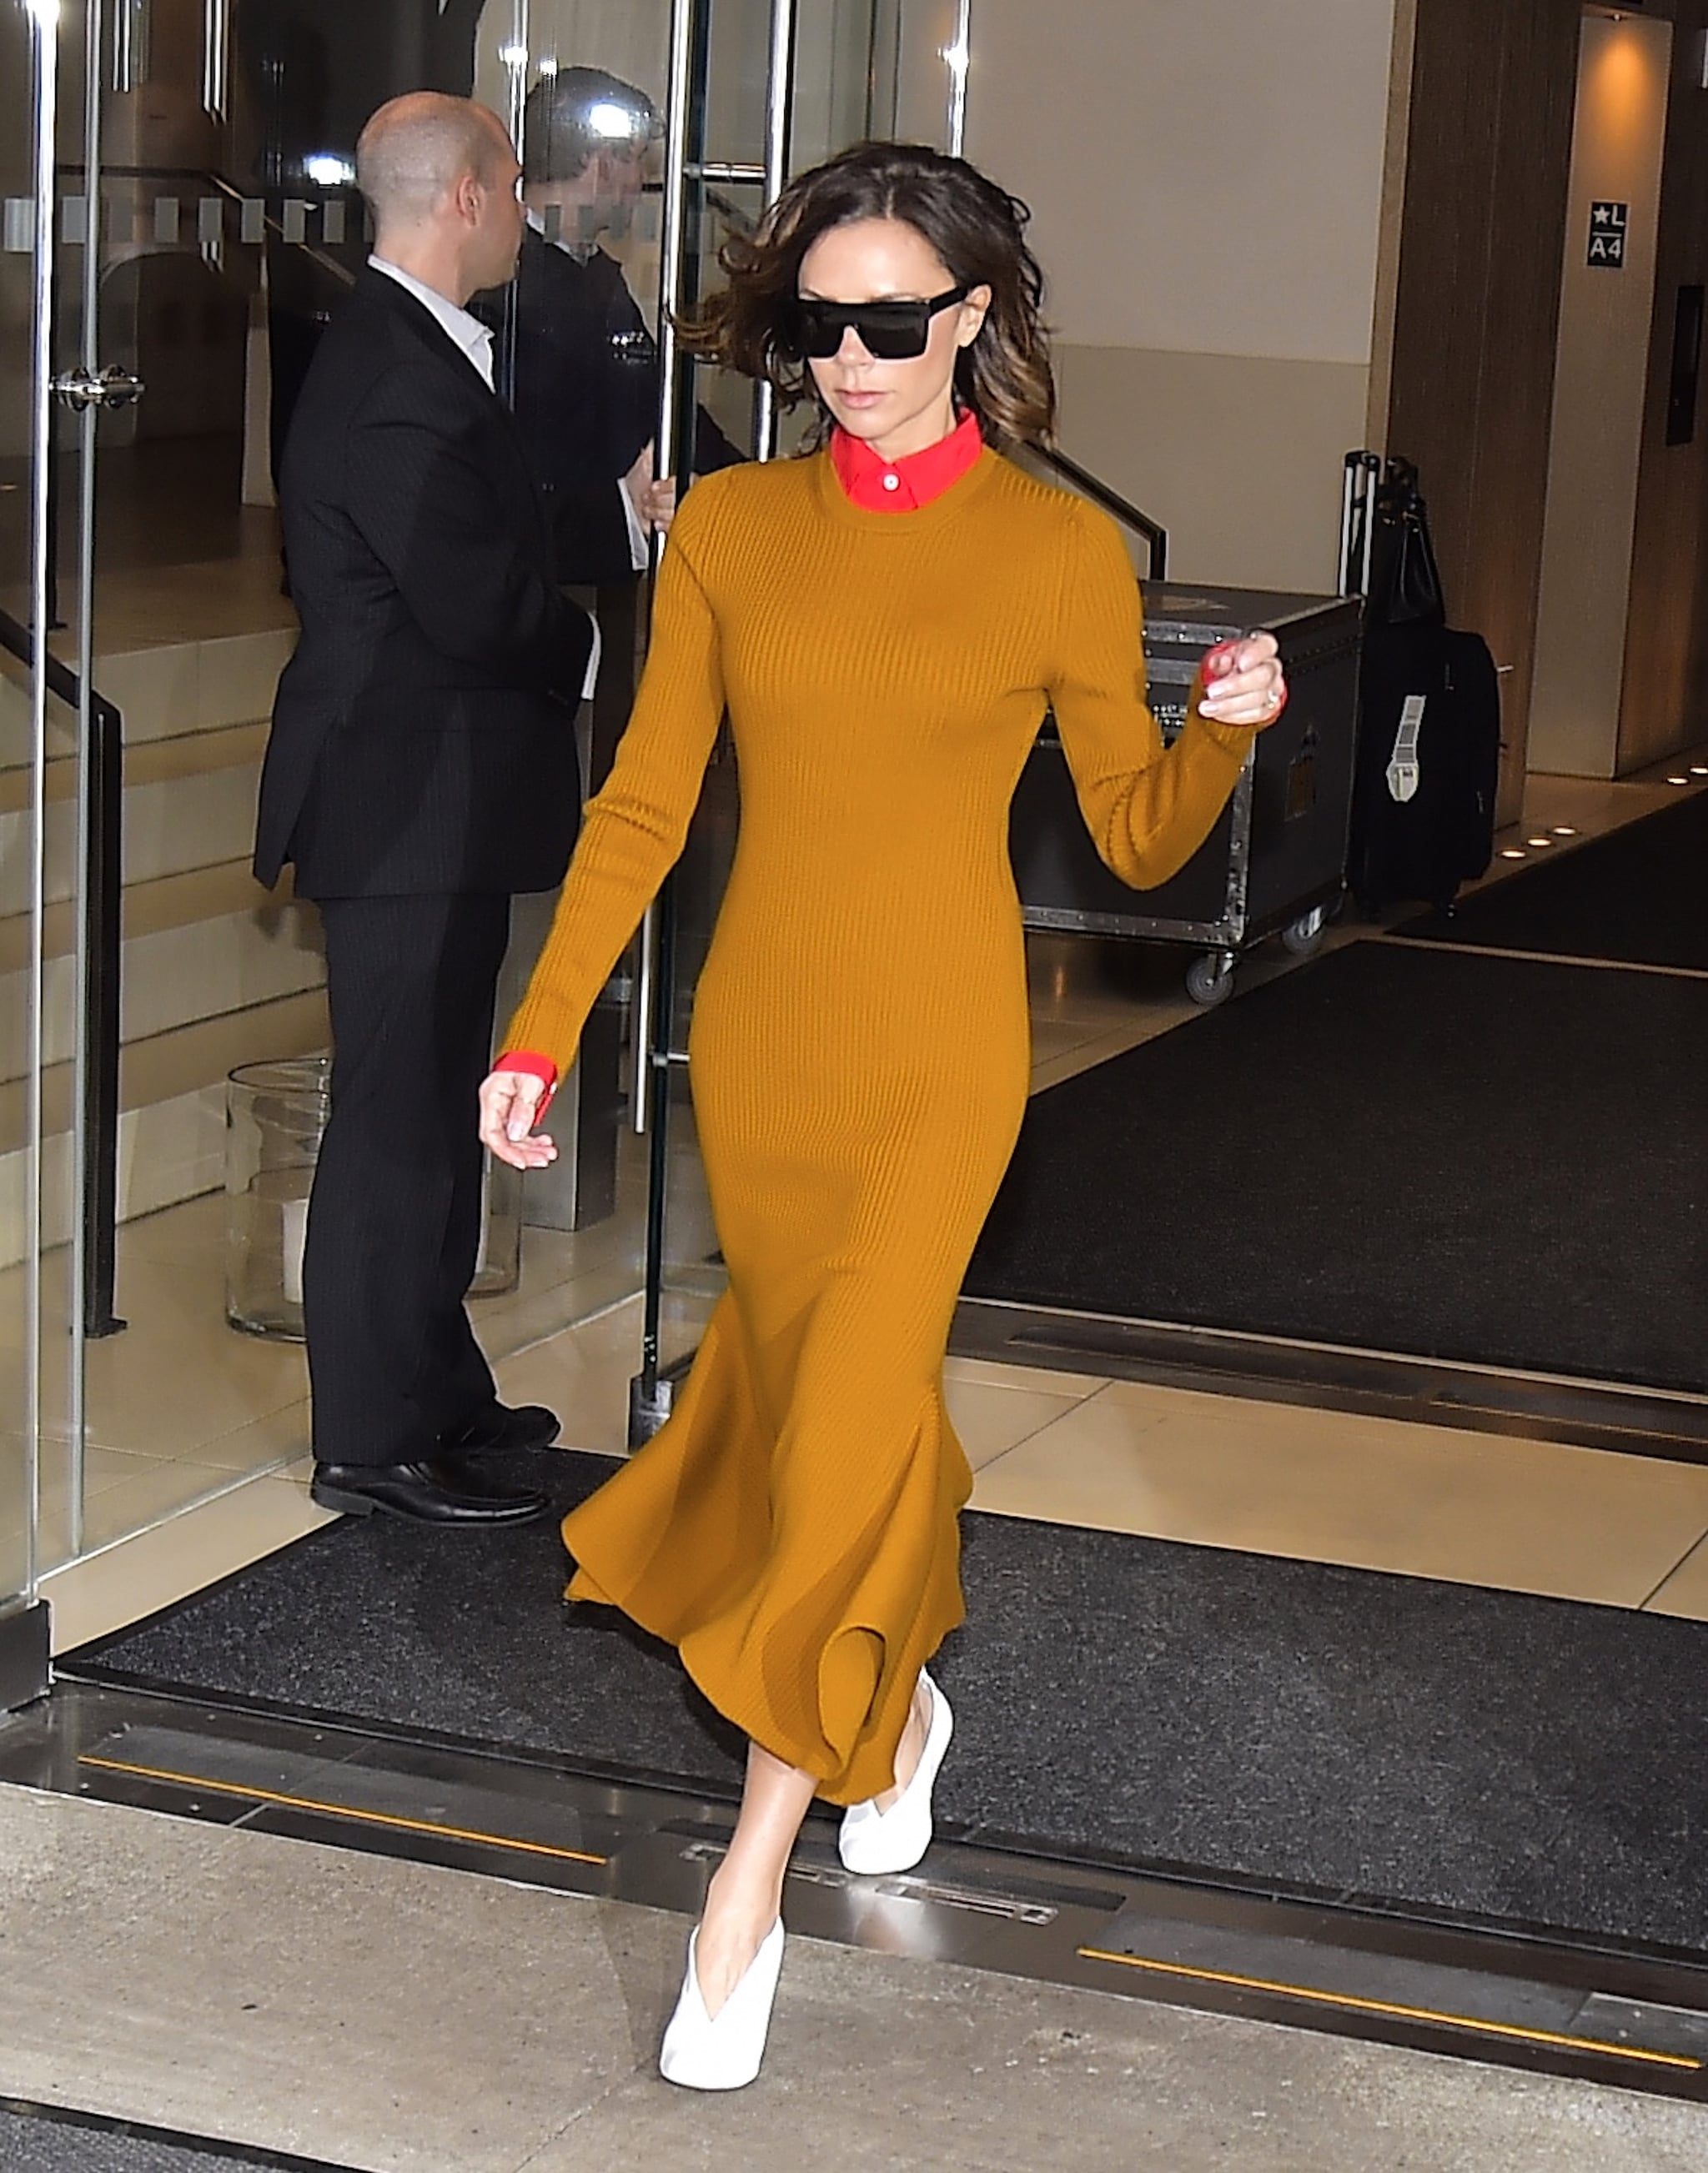 Punt Efficiënt Rijp Victoria Wearing the Same Combination in December 2016 | Selena Gomez's  Dress Says a Lot About Her Fashion Week Agenda | POPSUGAR Fashion Photo 3